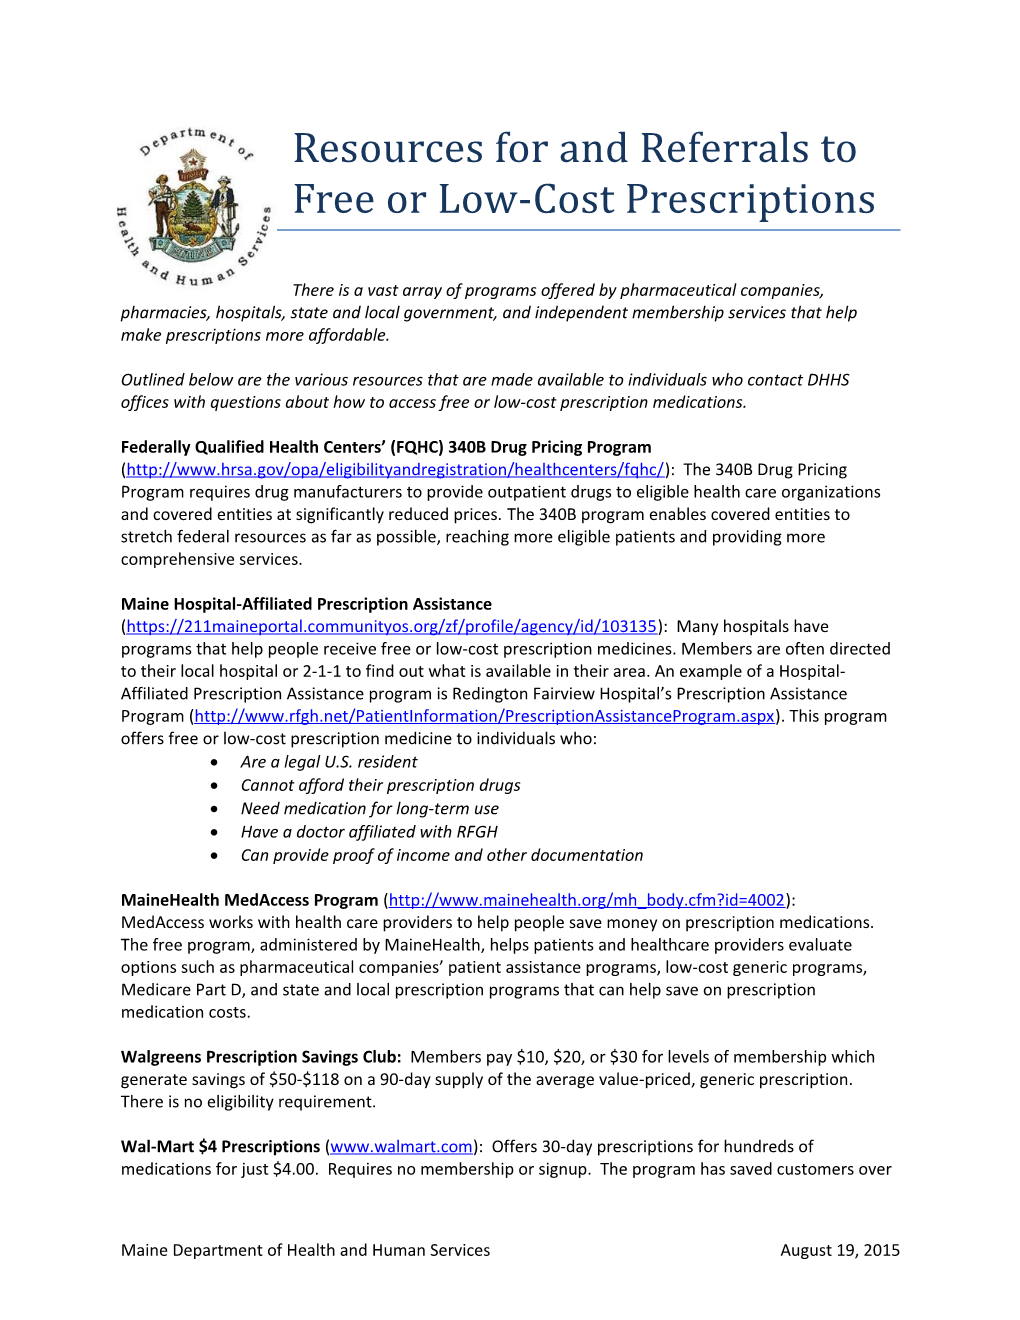 Resources for and Referrals to Free Or Low-Cost Prescriptions